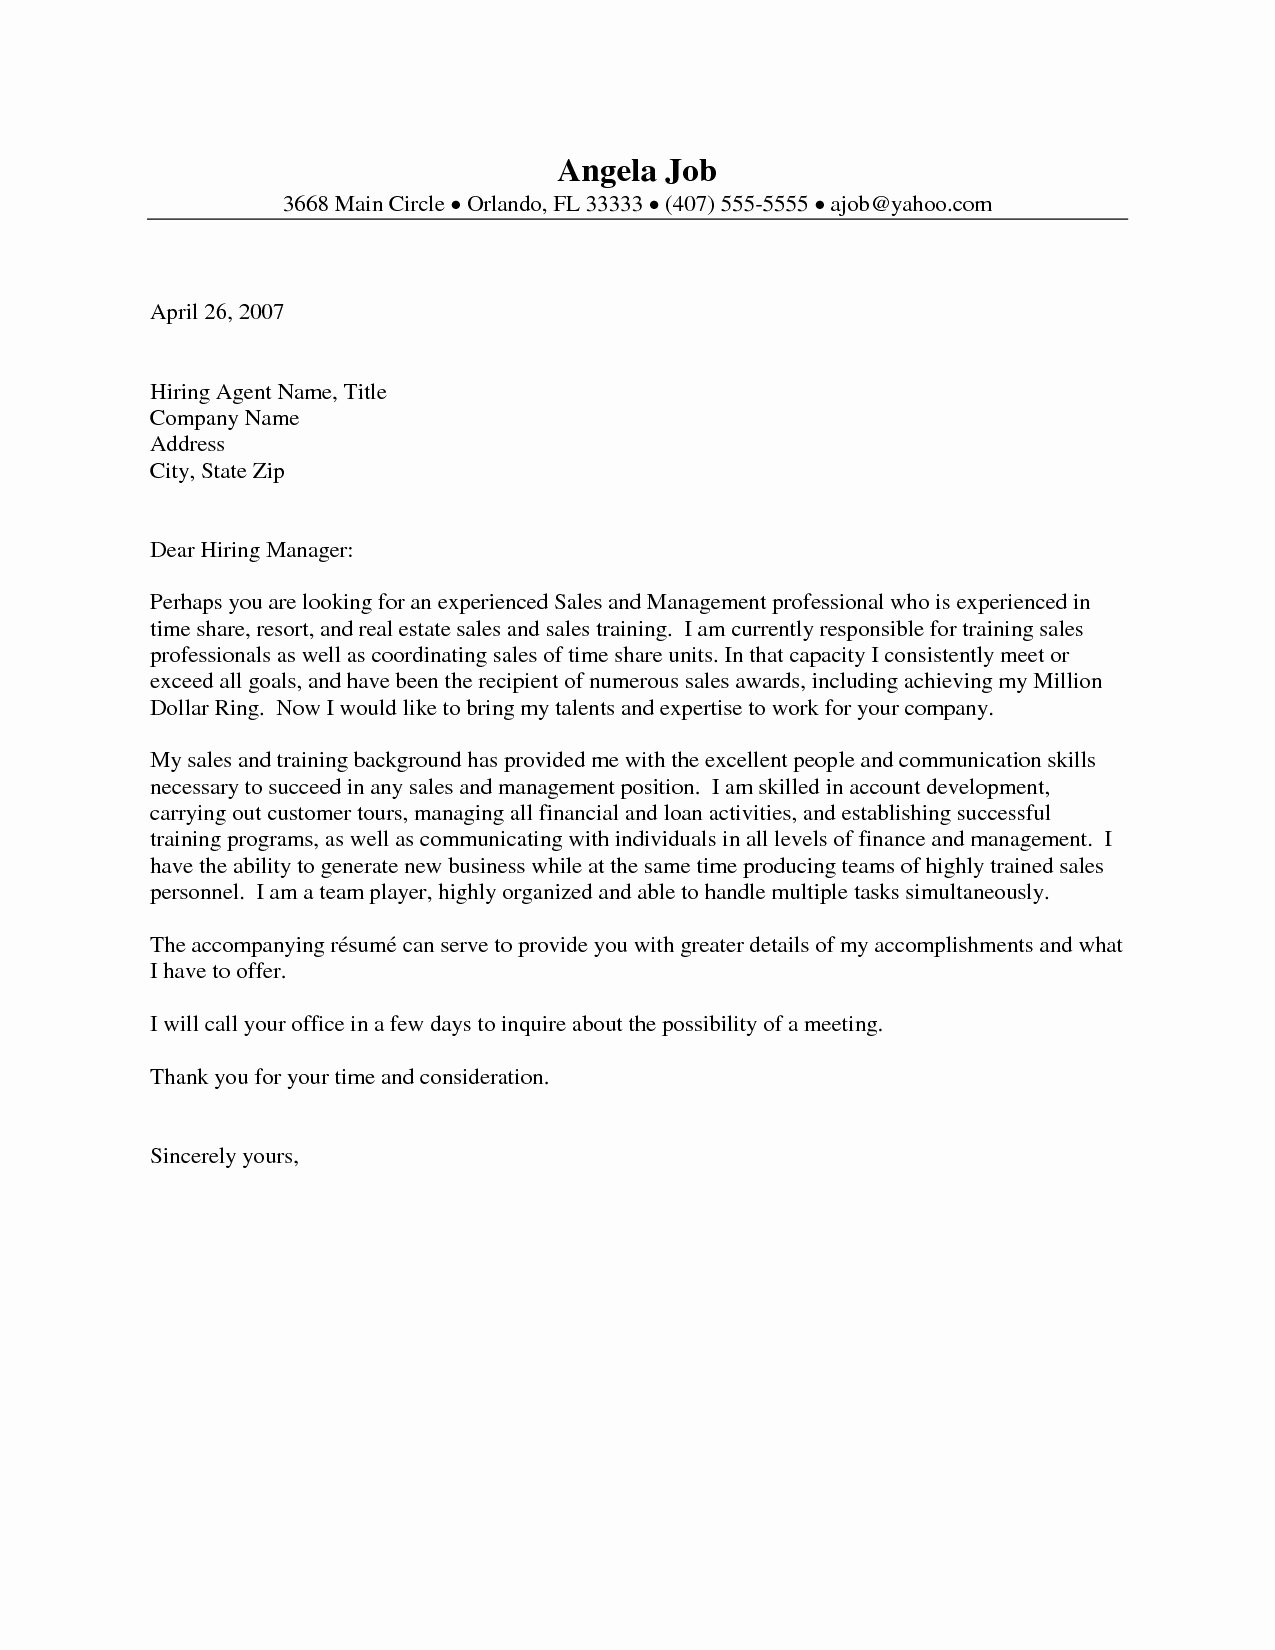 Cover Letter for Real Estate Agent Cover Letter Ideas On